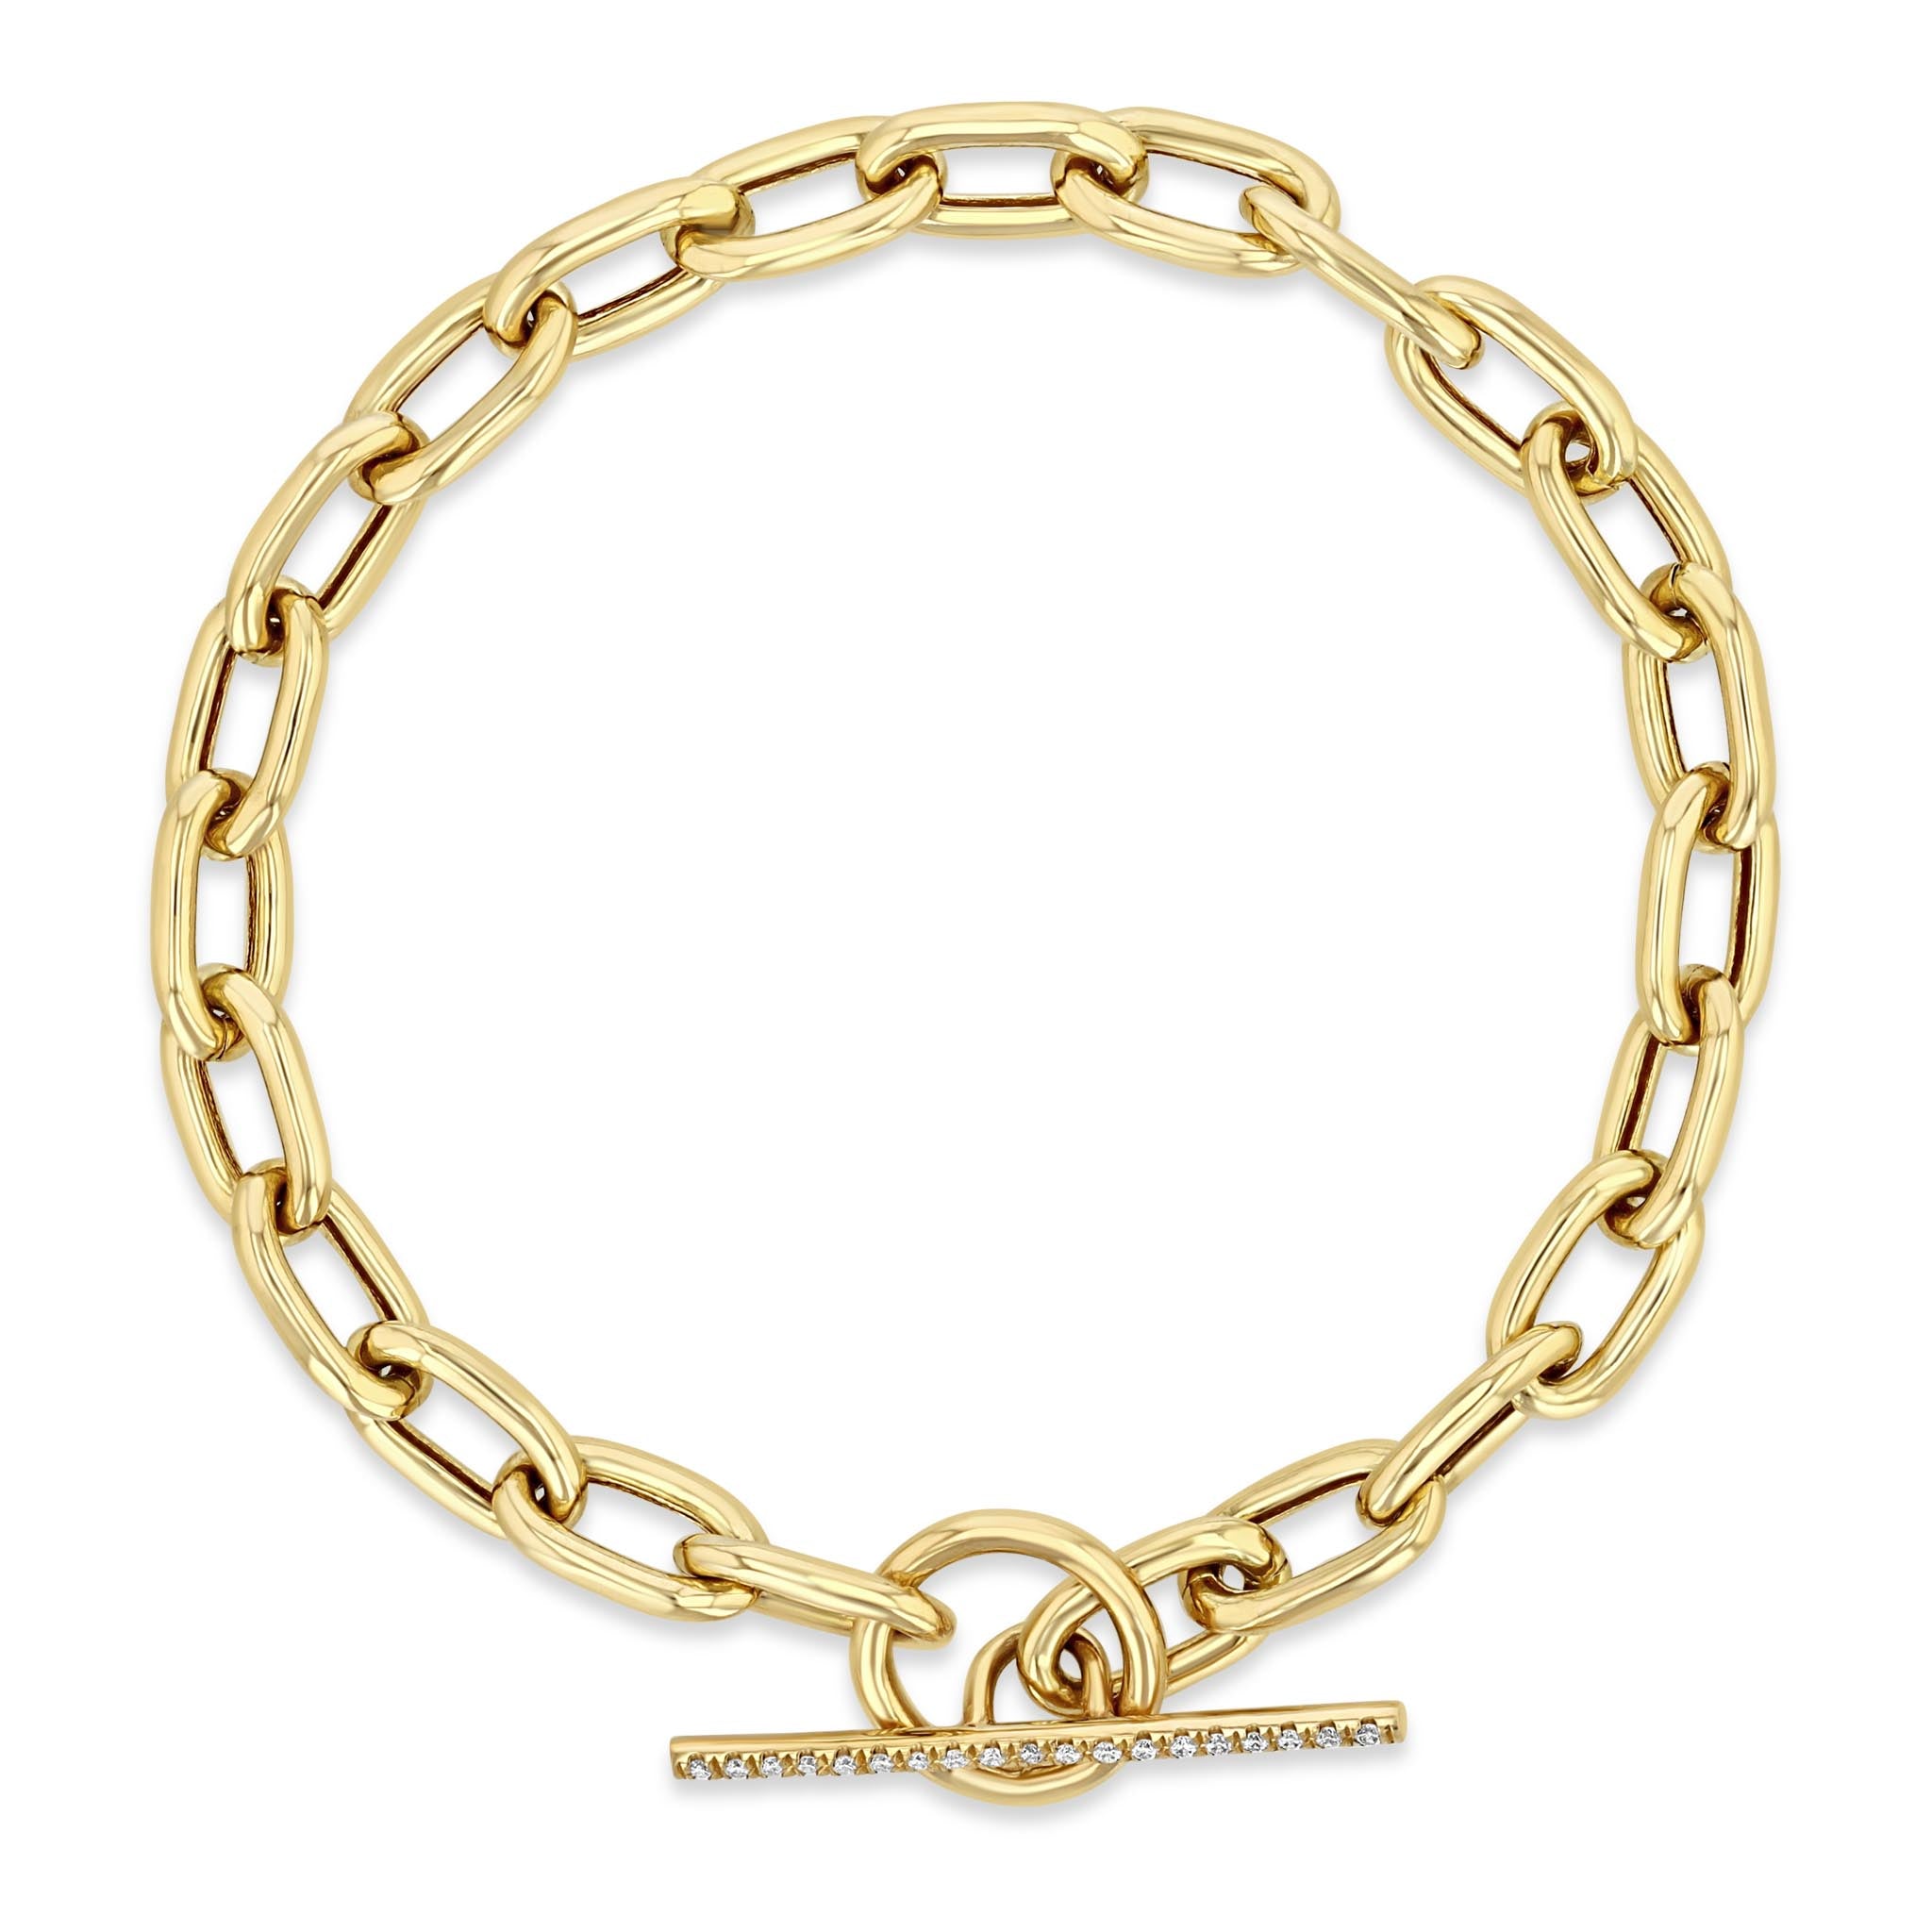 Extra Large Square Link Chain Bracelet with Pave Toggle Clasp